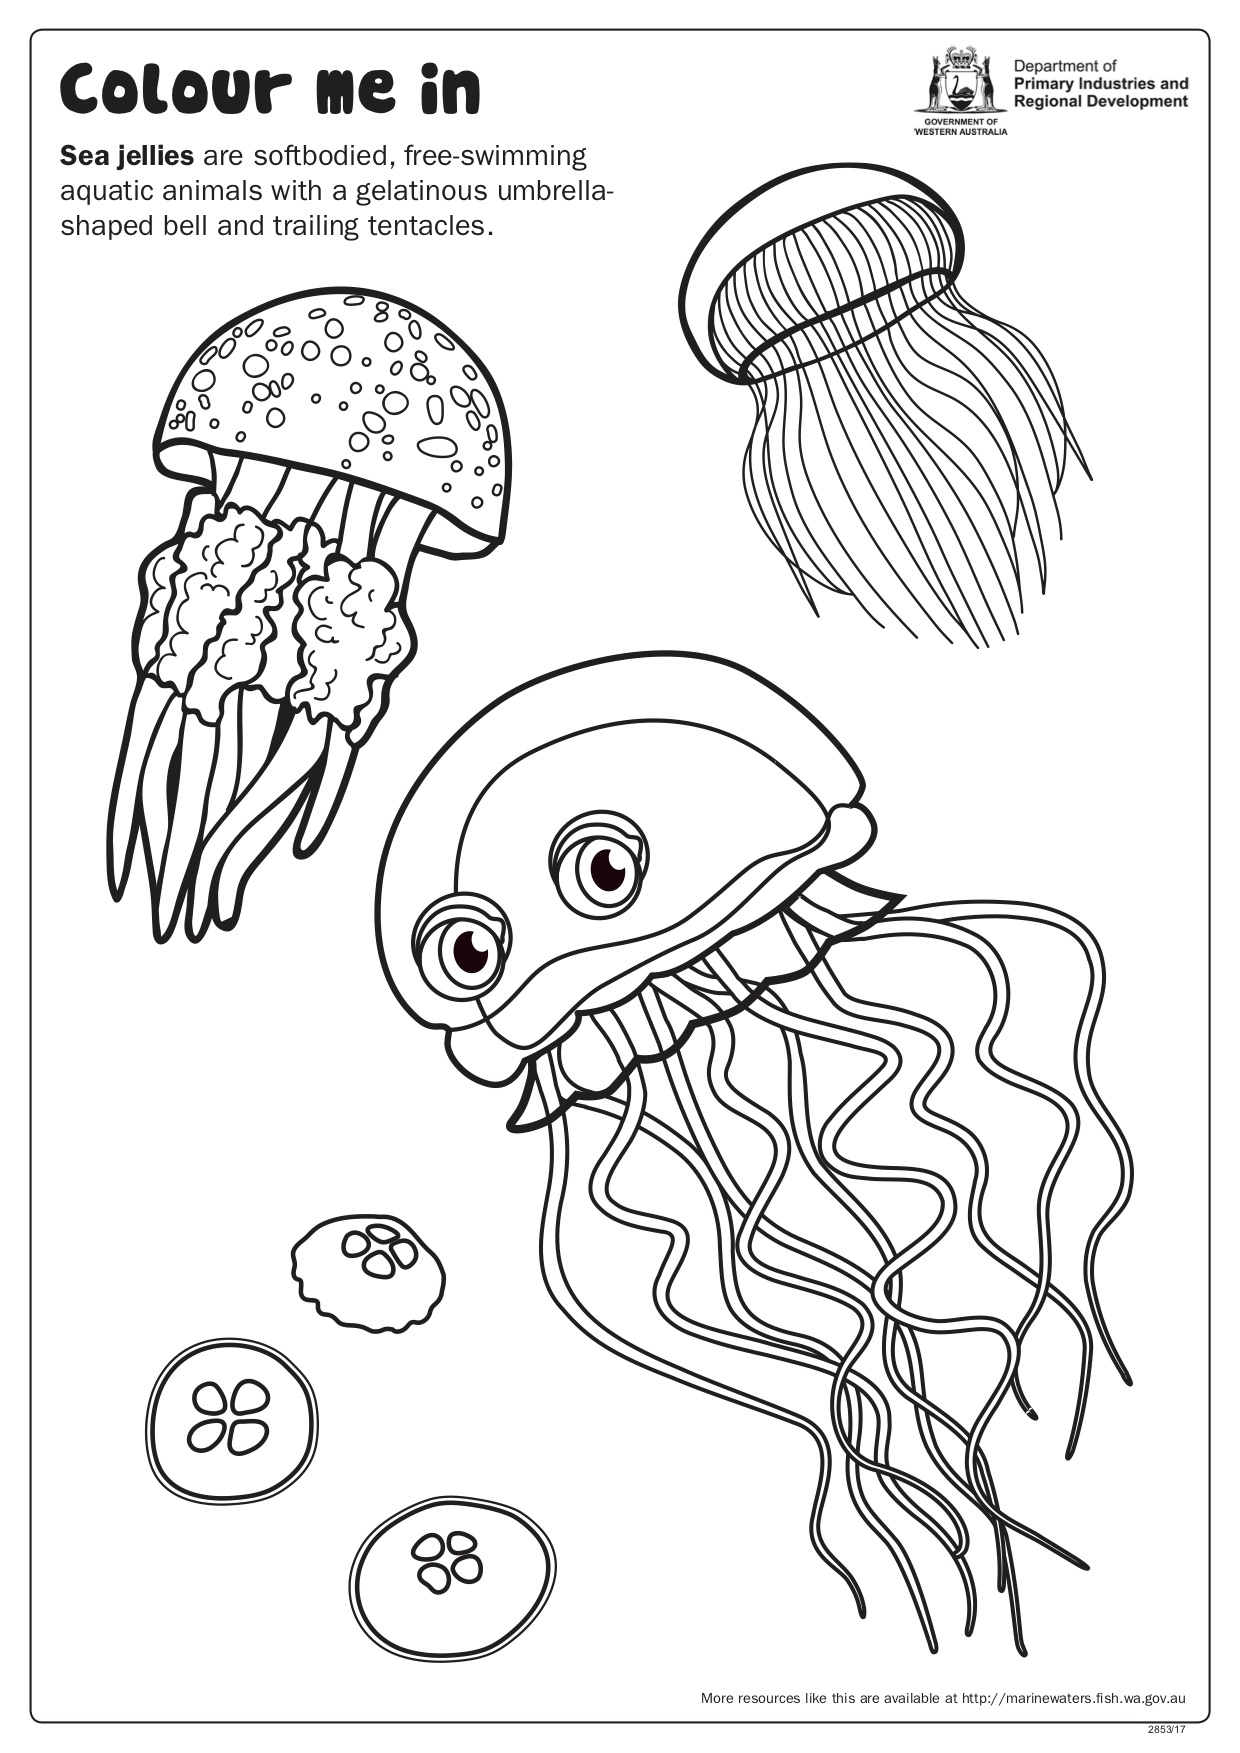 195 Jellyfish Coloring Page Designs: Underwater Beauty in Color 181